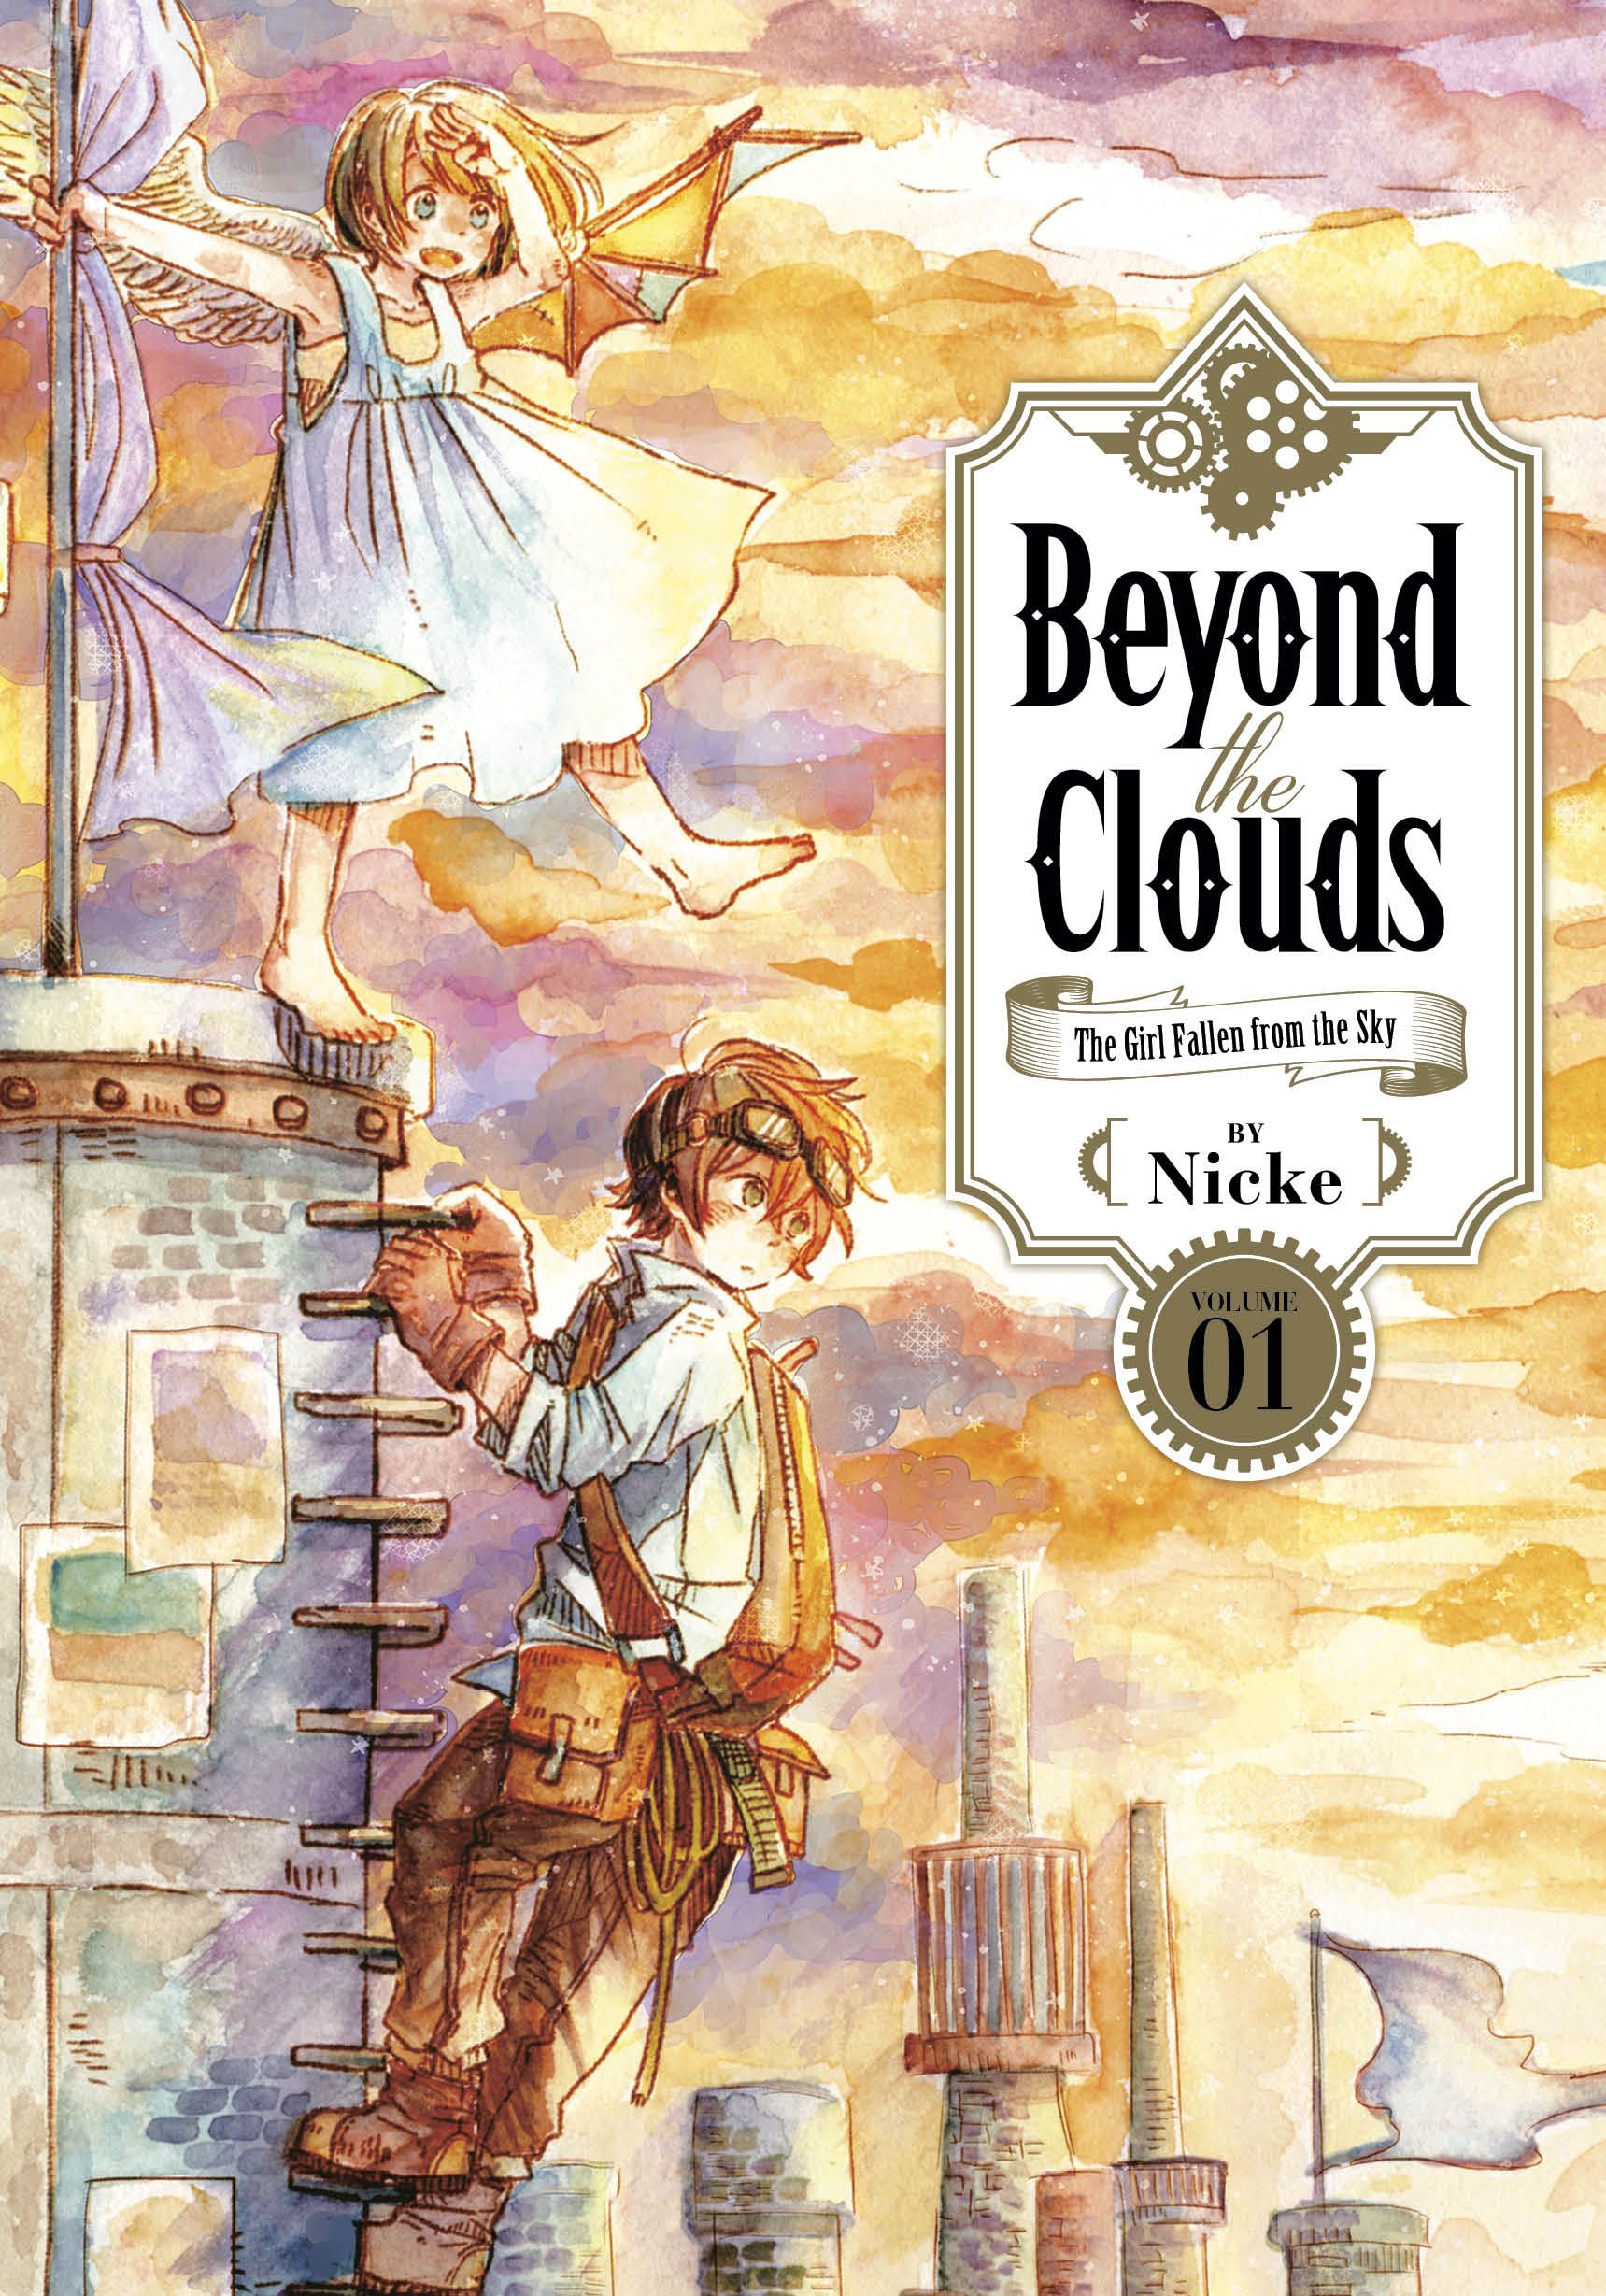 Graphic Novels for Winter 2020: Beyond the Clouds